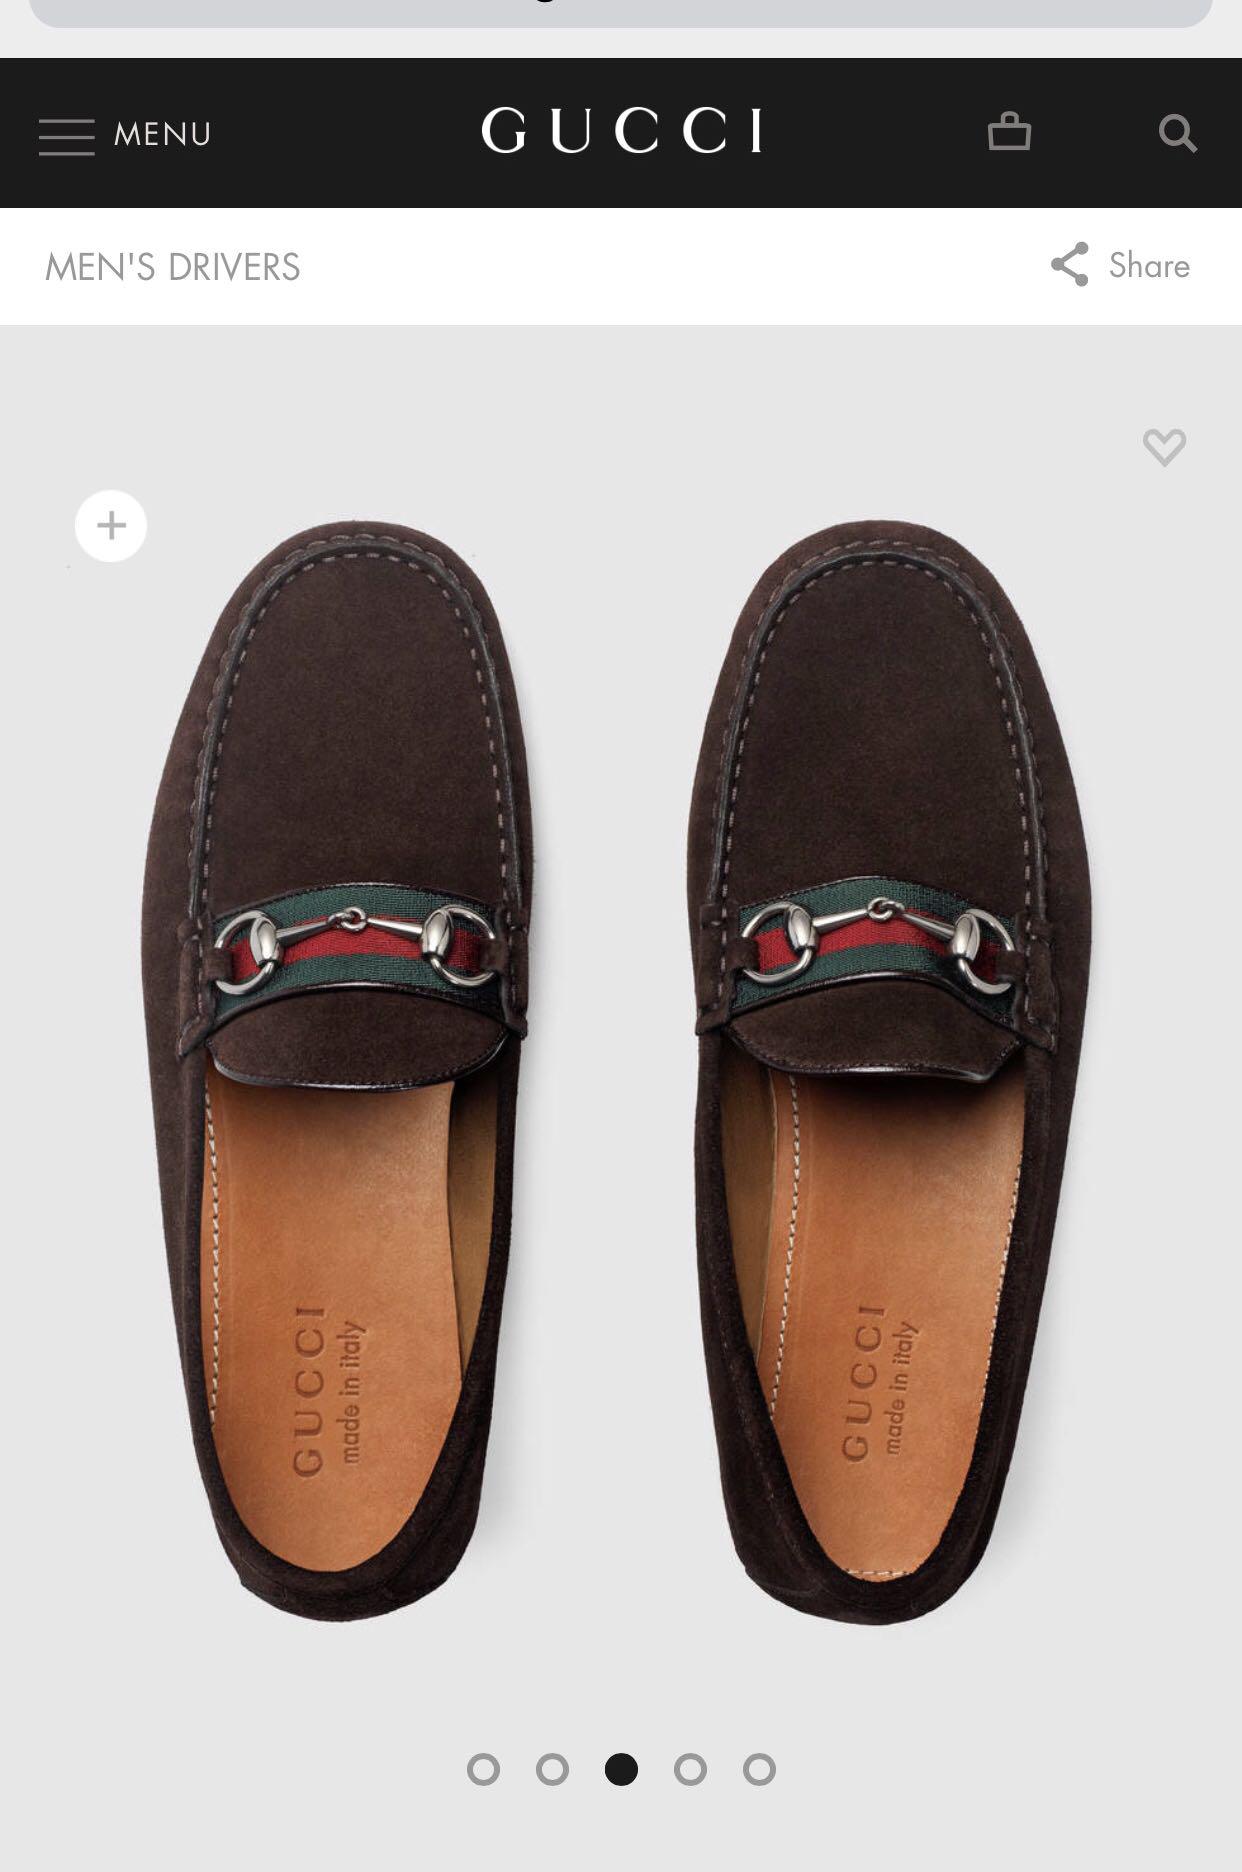 Gucci Suede Driver with Web (Loafer 